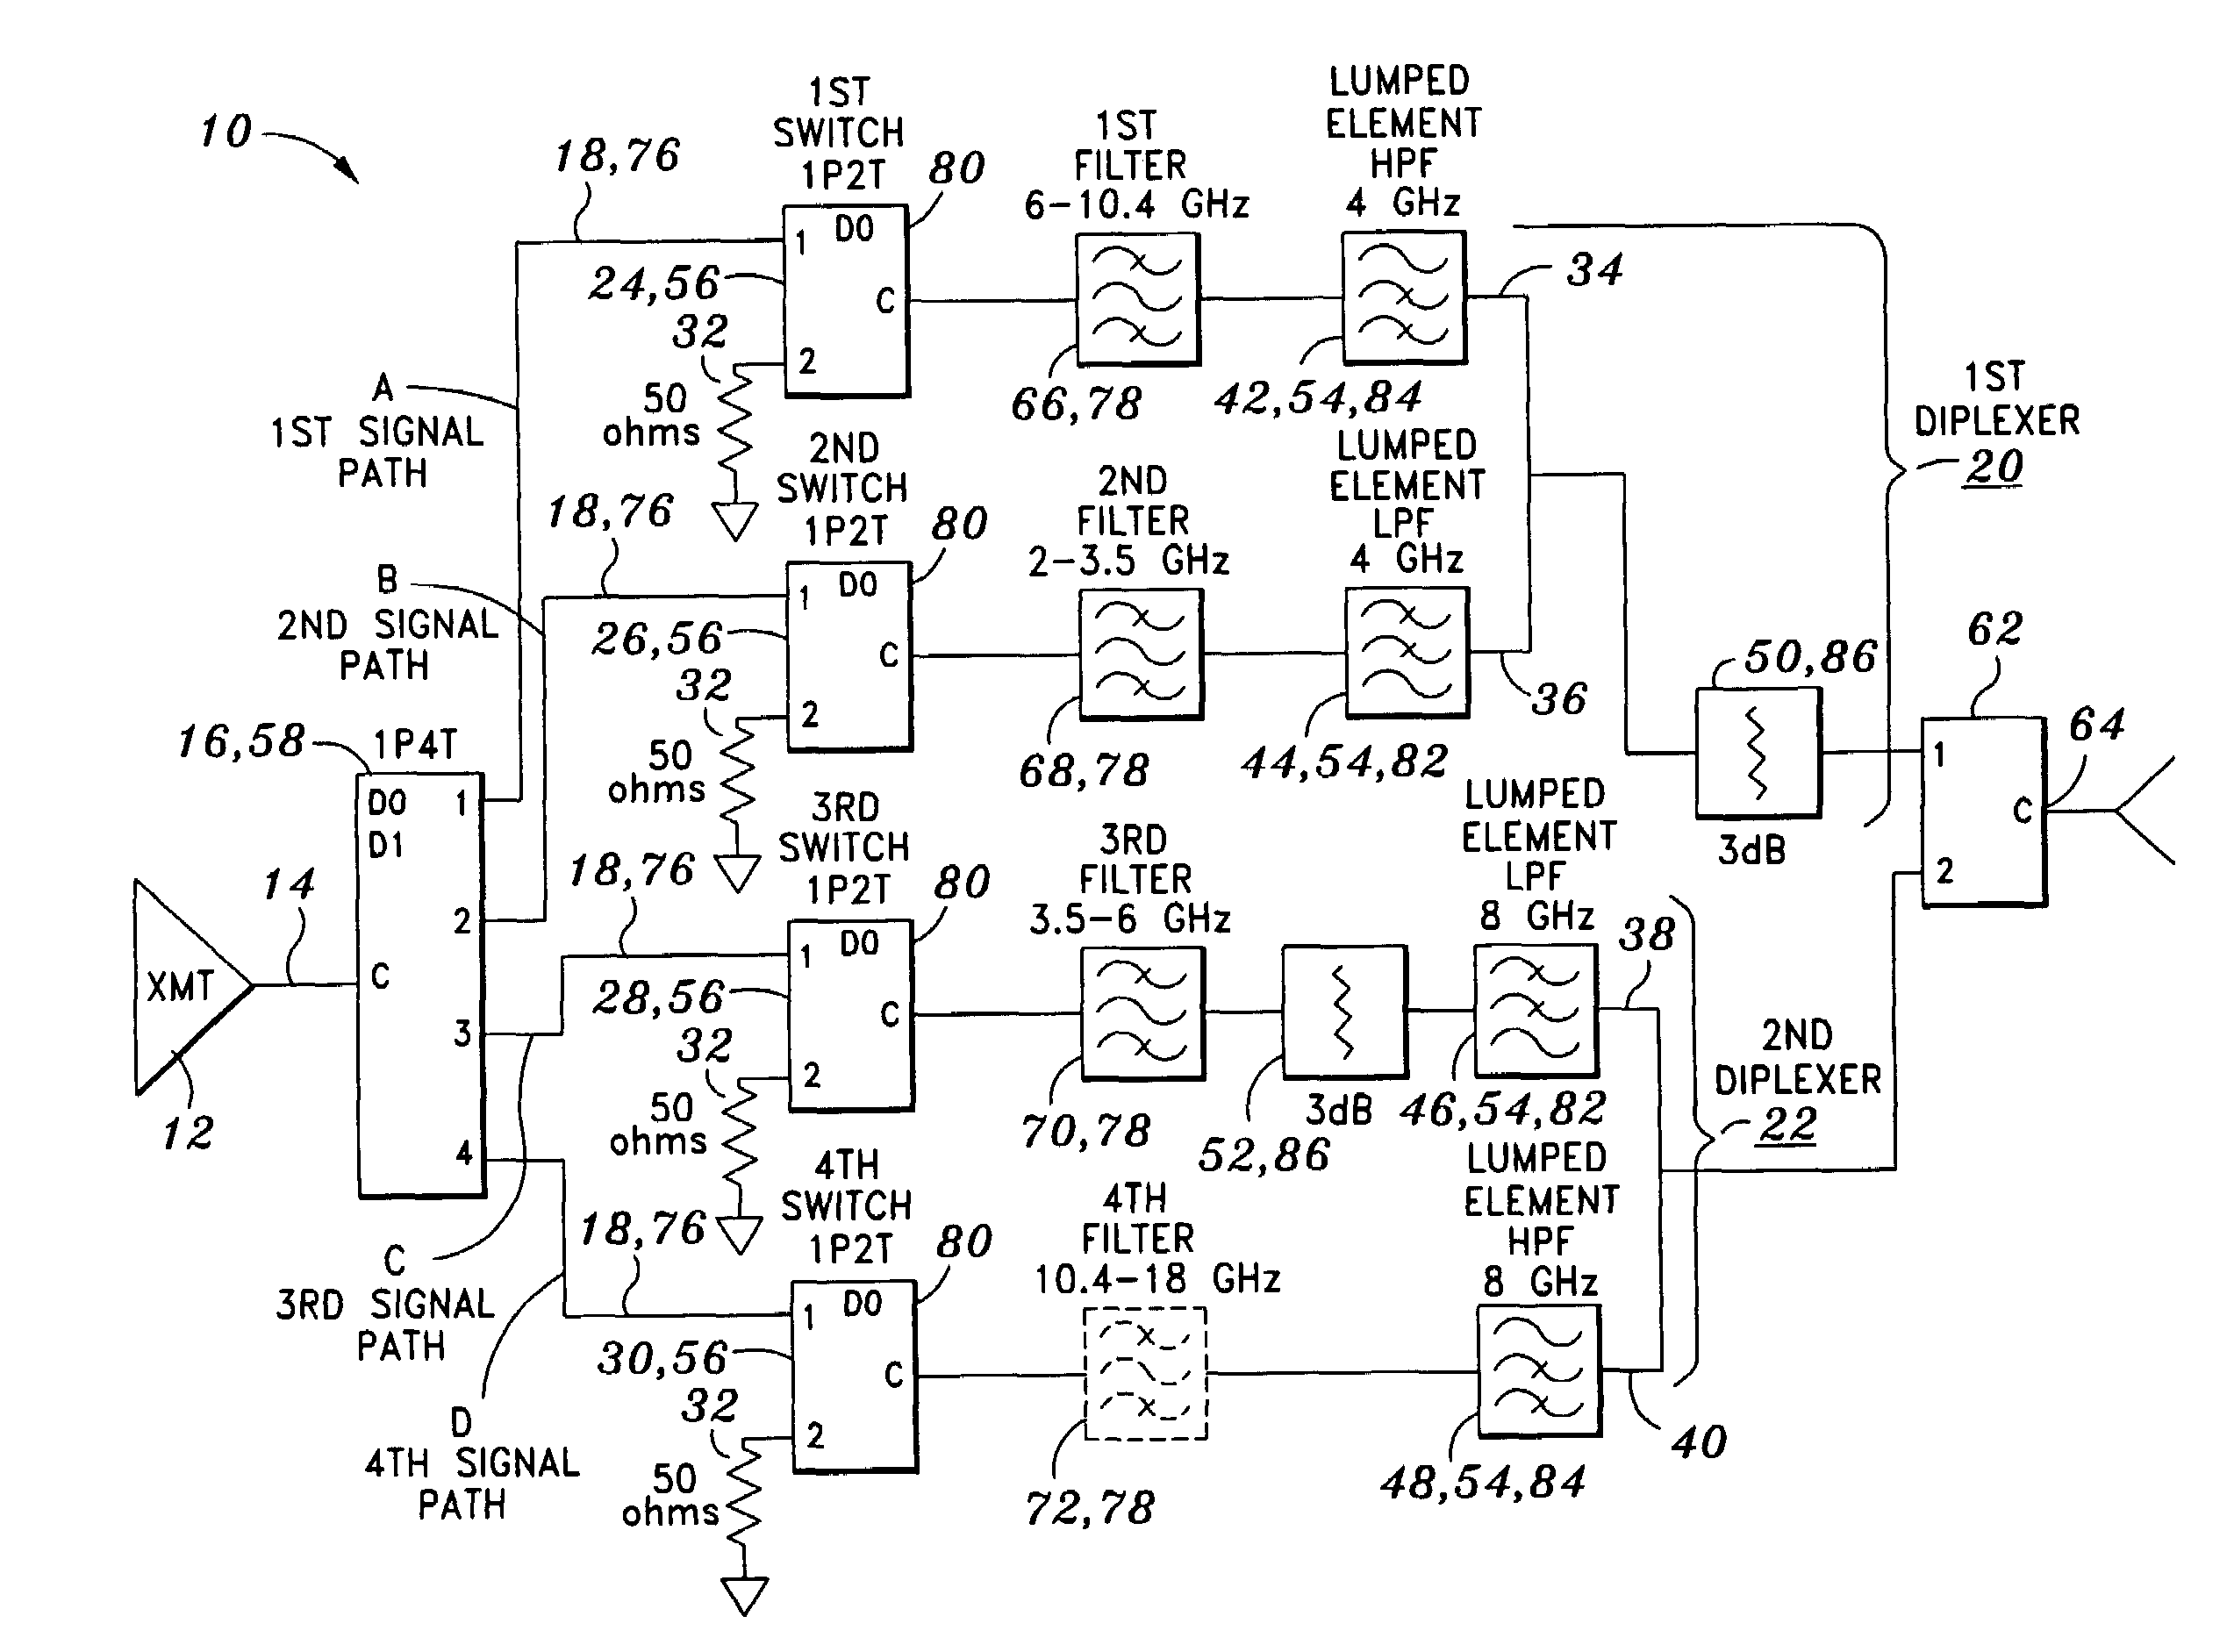 Switched multiplexer method to combine multiple broadband RF sources